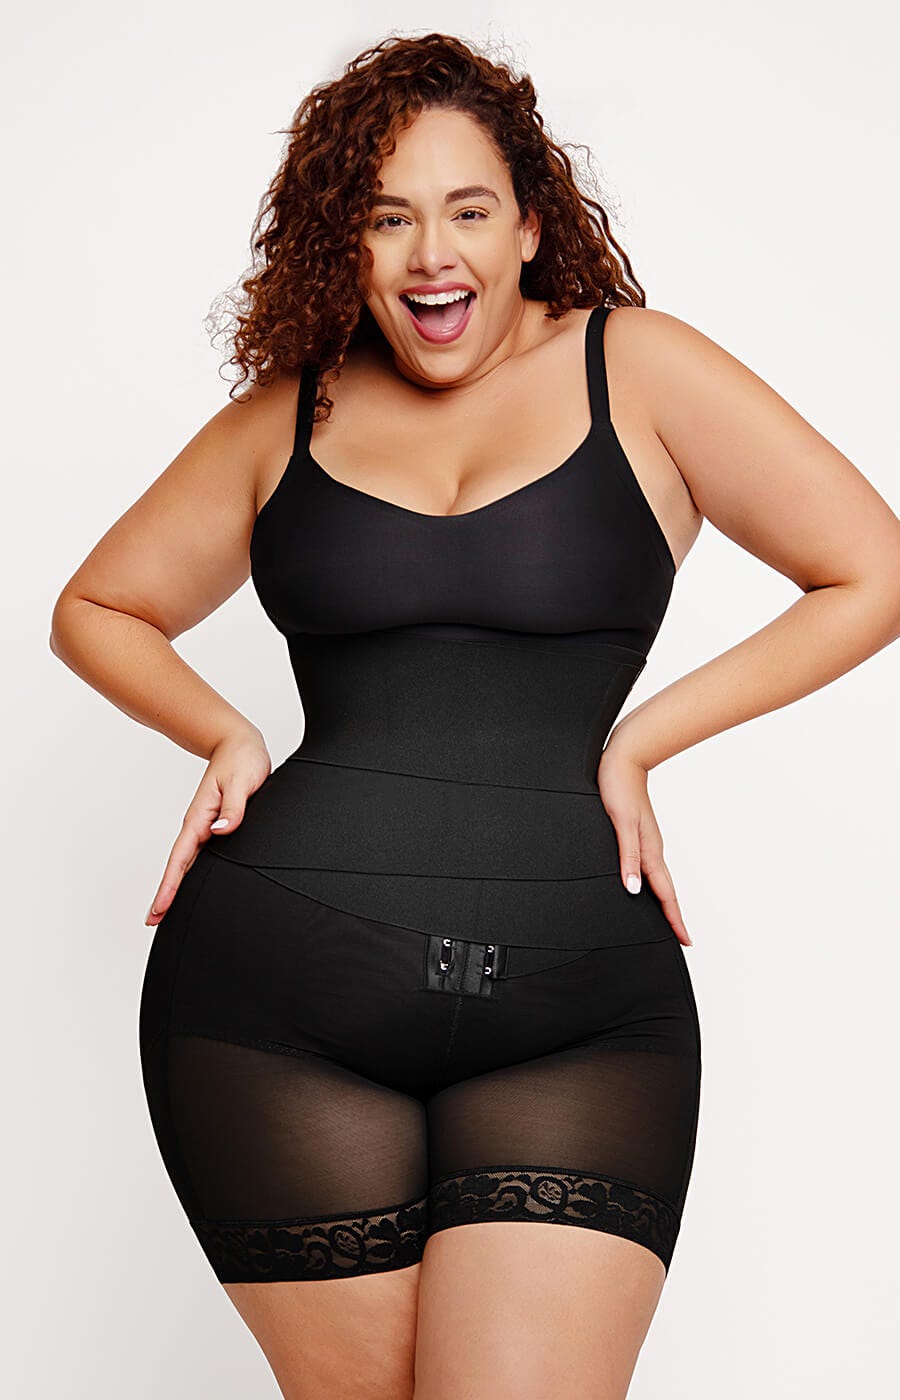 The Ultimate Guide to Shapewear for Tummy Control That Doesn't Roll Down, by Sylvia Jones